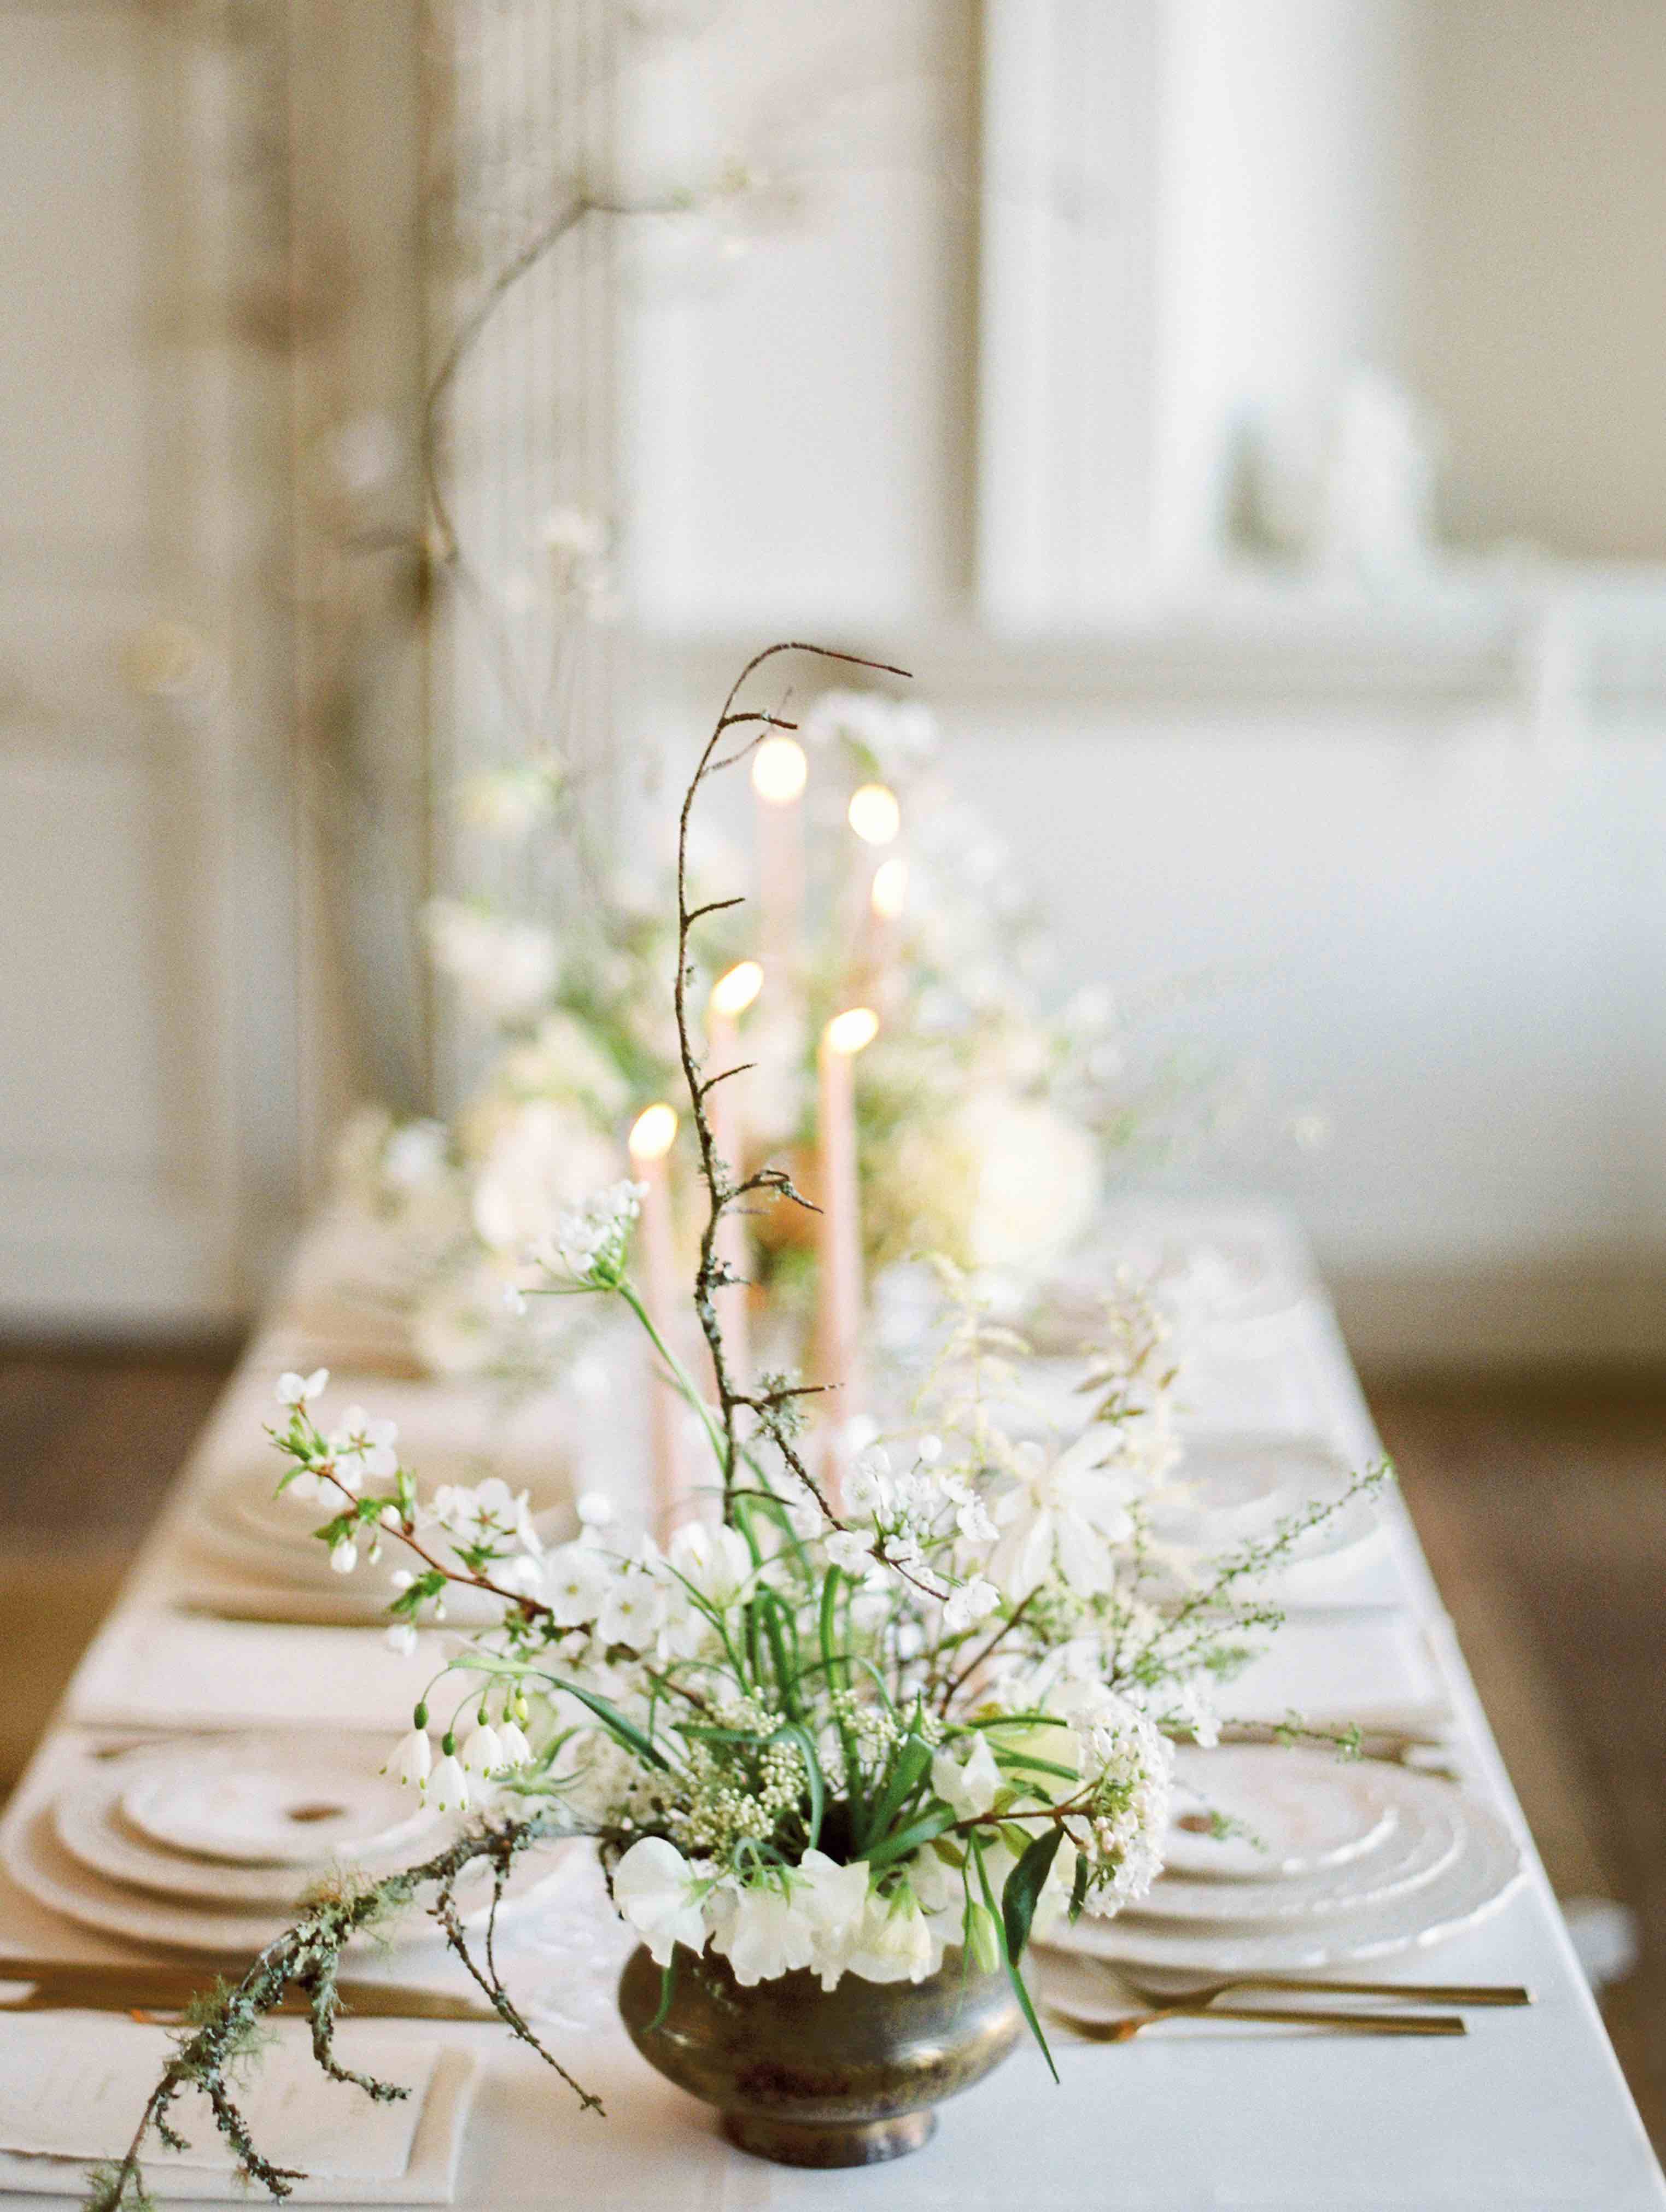 Romantic wedding table with beautiful Spring flowers | The Timeless Stylist | Hannah Duffy